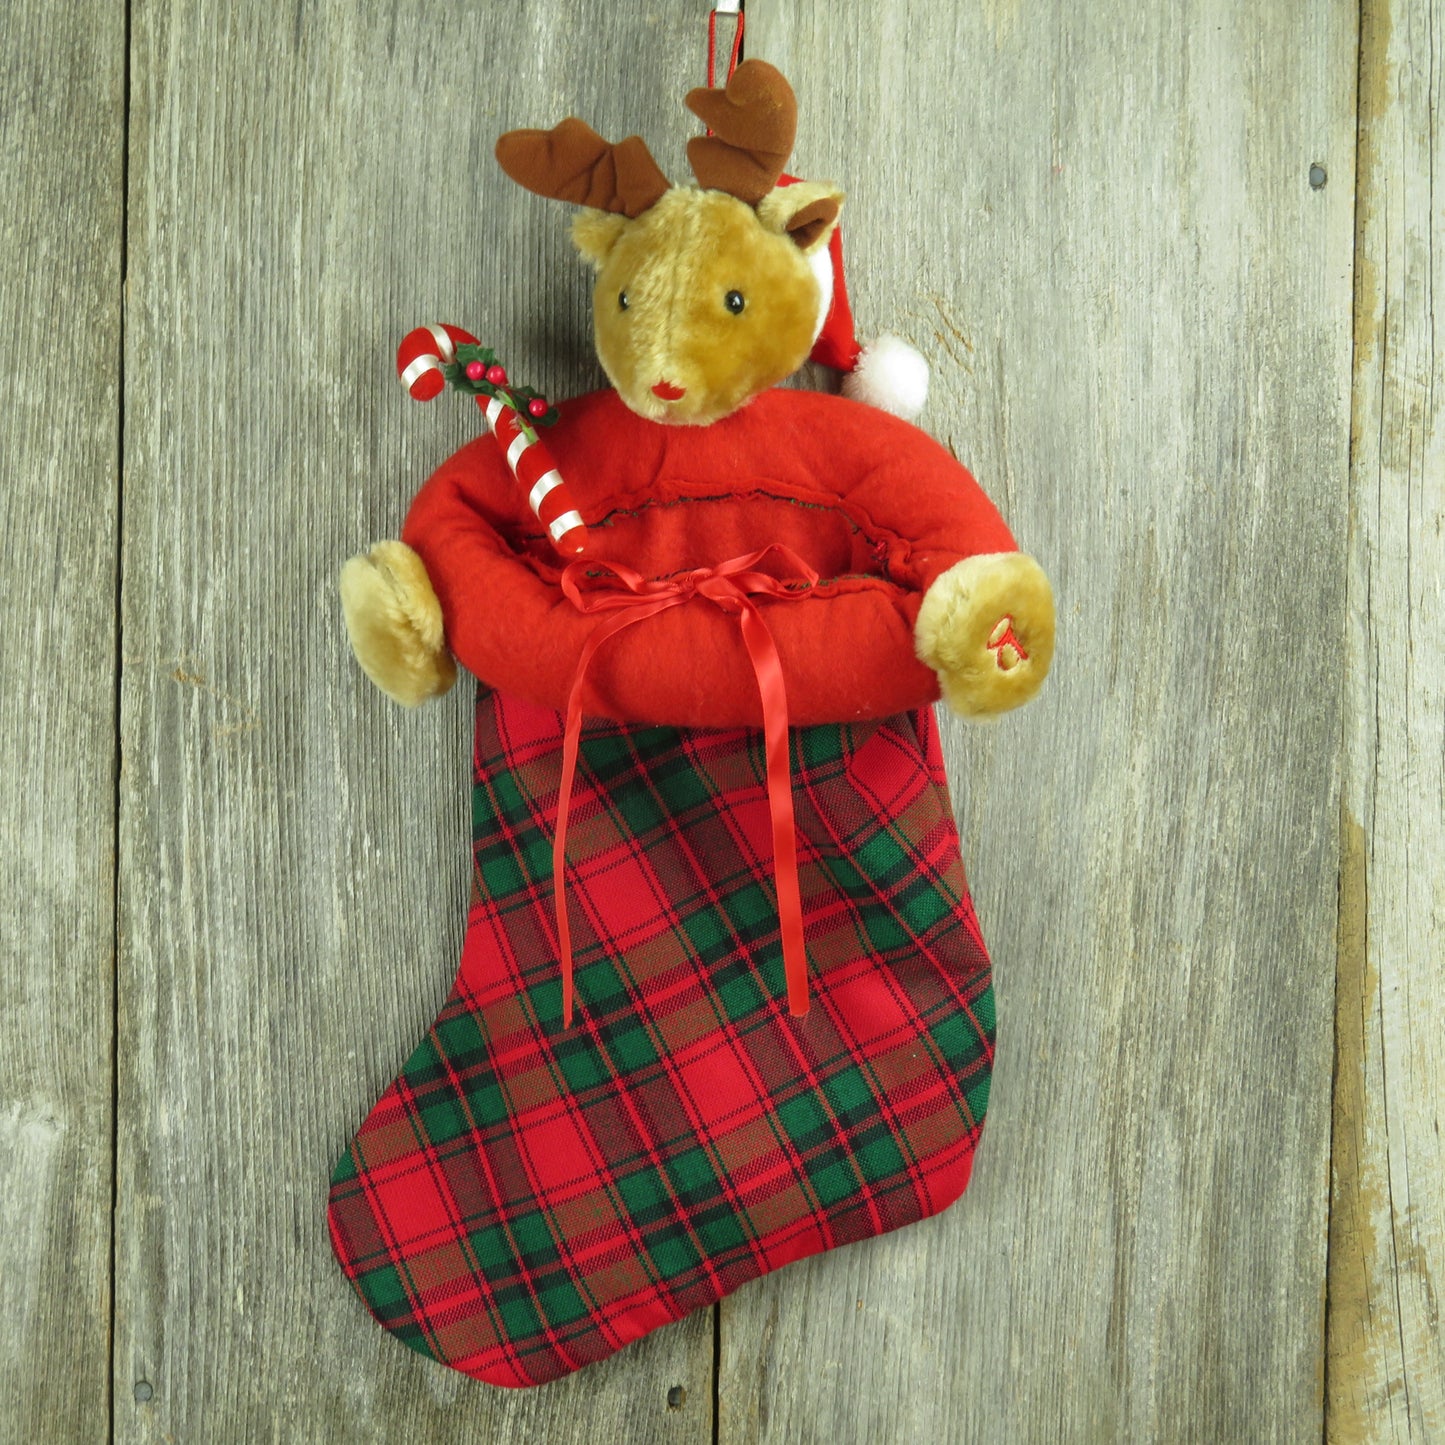 Vintage Reindeer Plaid Plush Christmas Stocking Red Green Candy Cane - At Grandma's Table